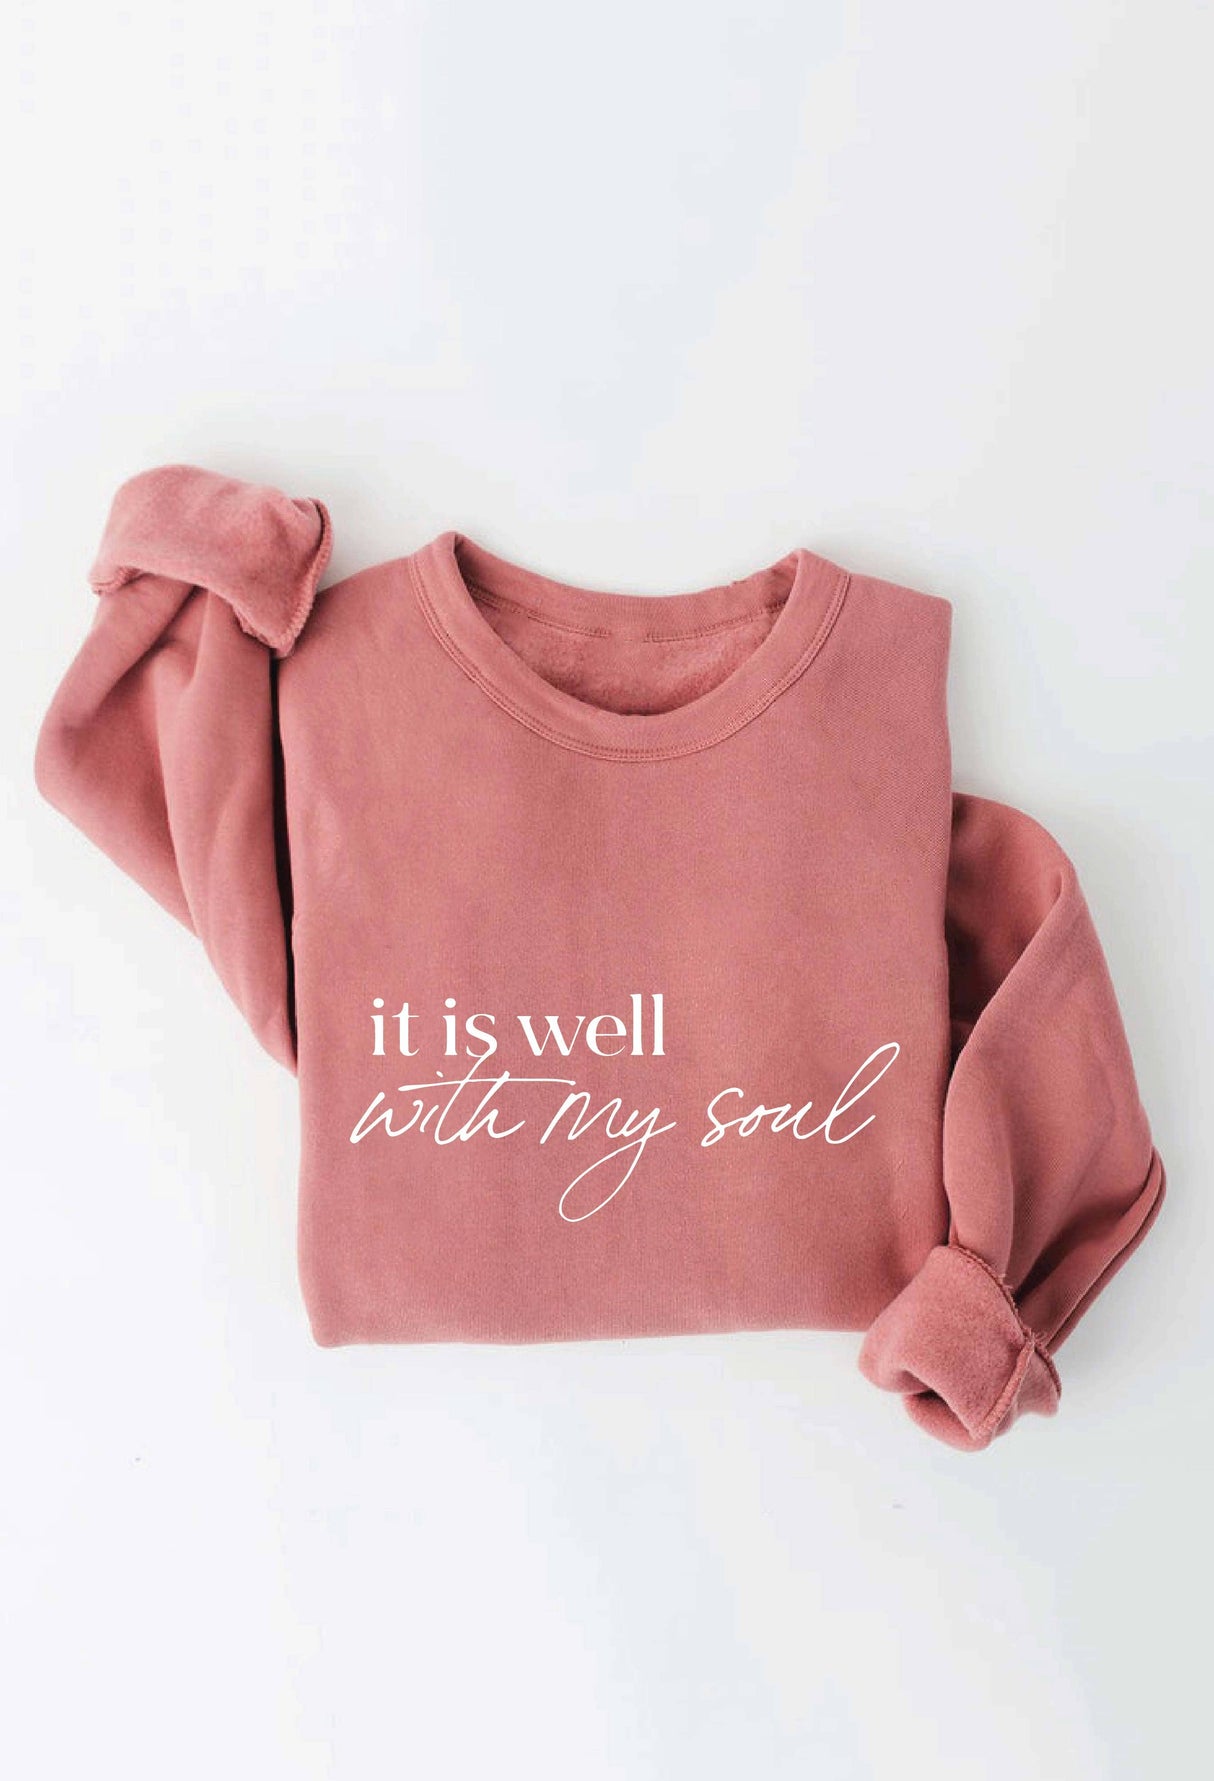 IT IS WELL WITH MY SOUL Graphic Sweatshirt Top